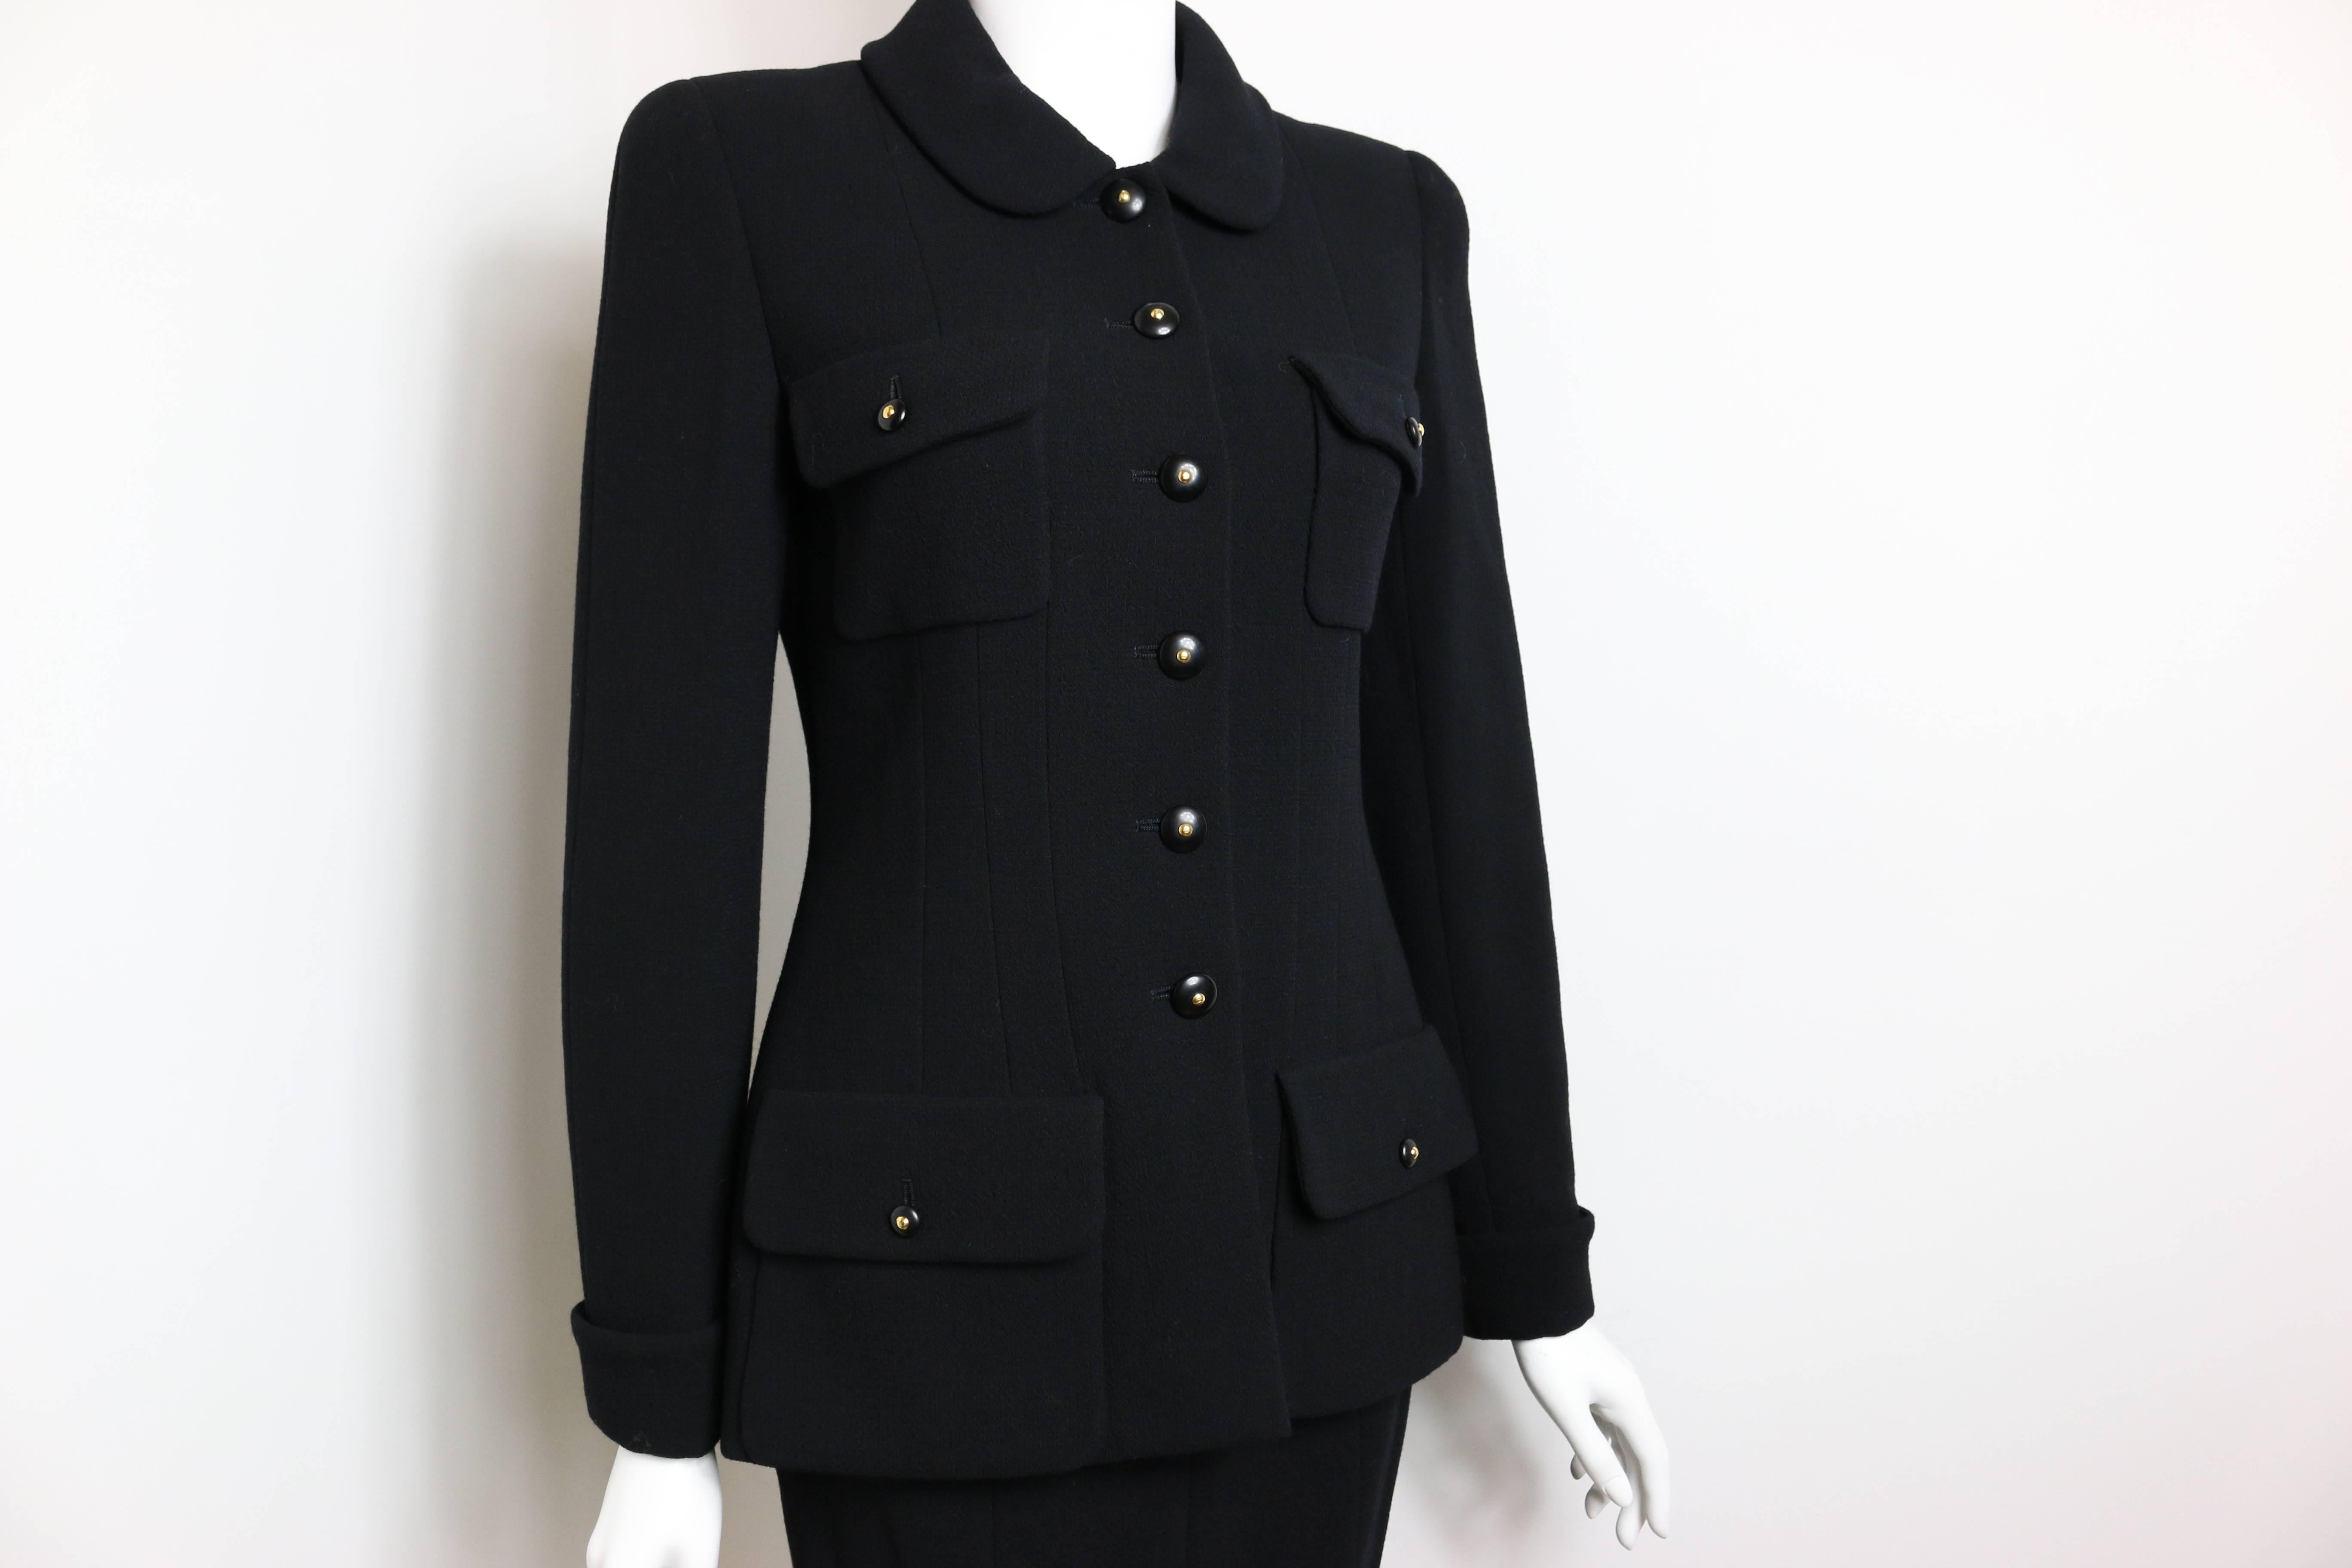 - Chanel black boucle wool suit  from fall 1995 collection. 

- Military style inspired jacket. 

- Peter Pan style collar. 

- The jacket is featuring four front buttons pockets and six front center buttons. 

- Skirt has three buttons at